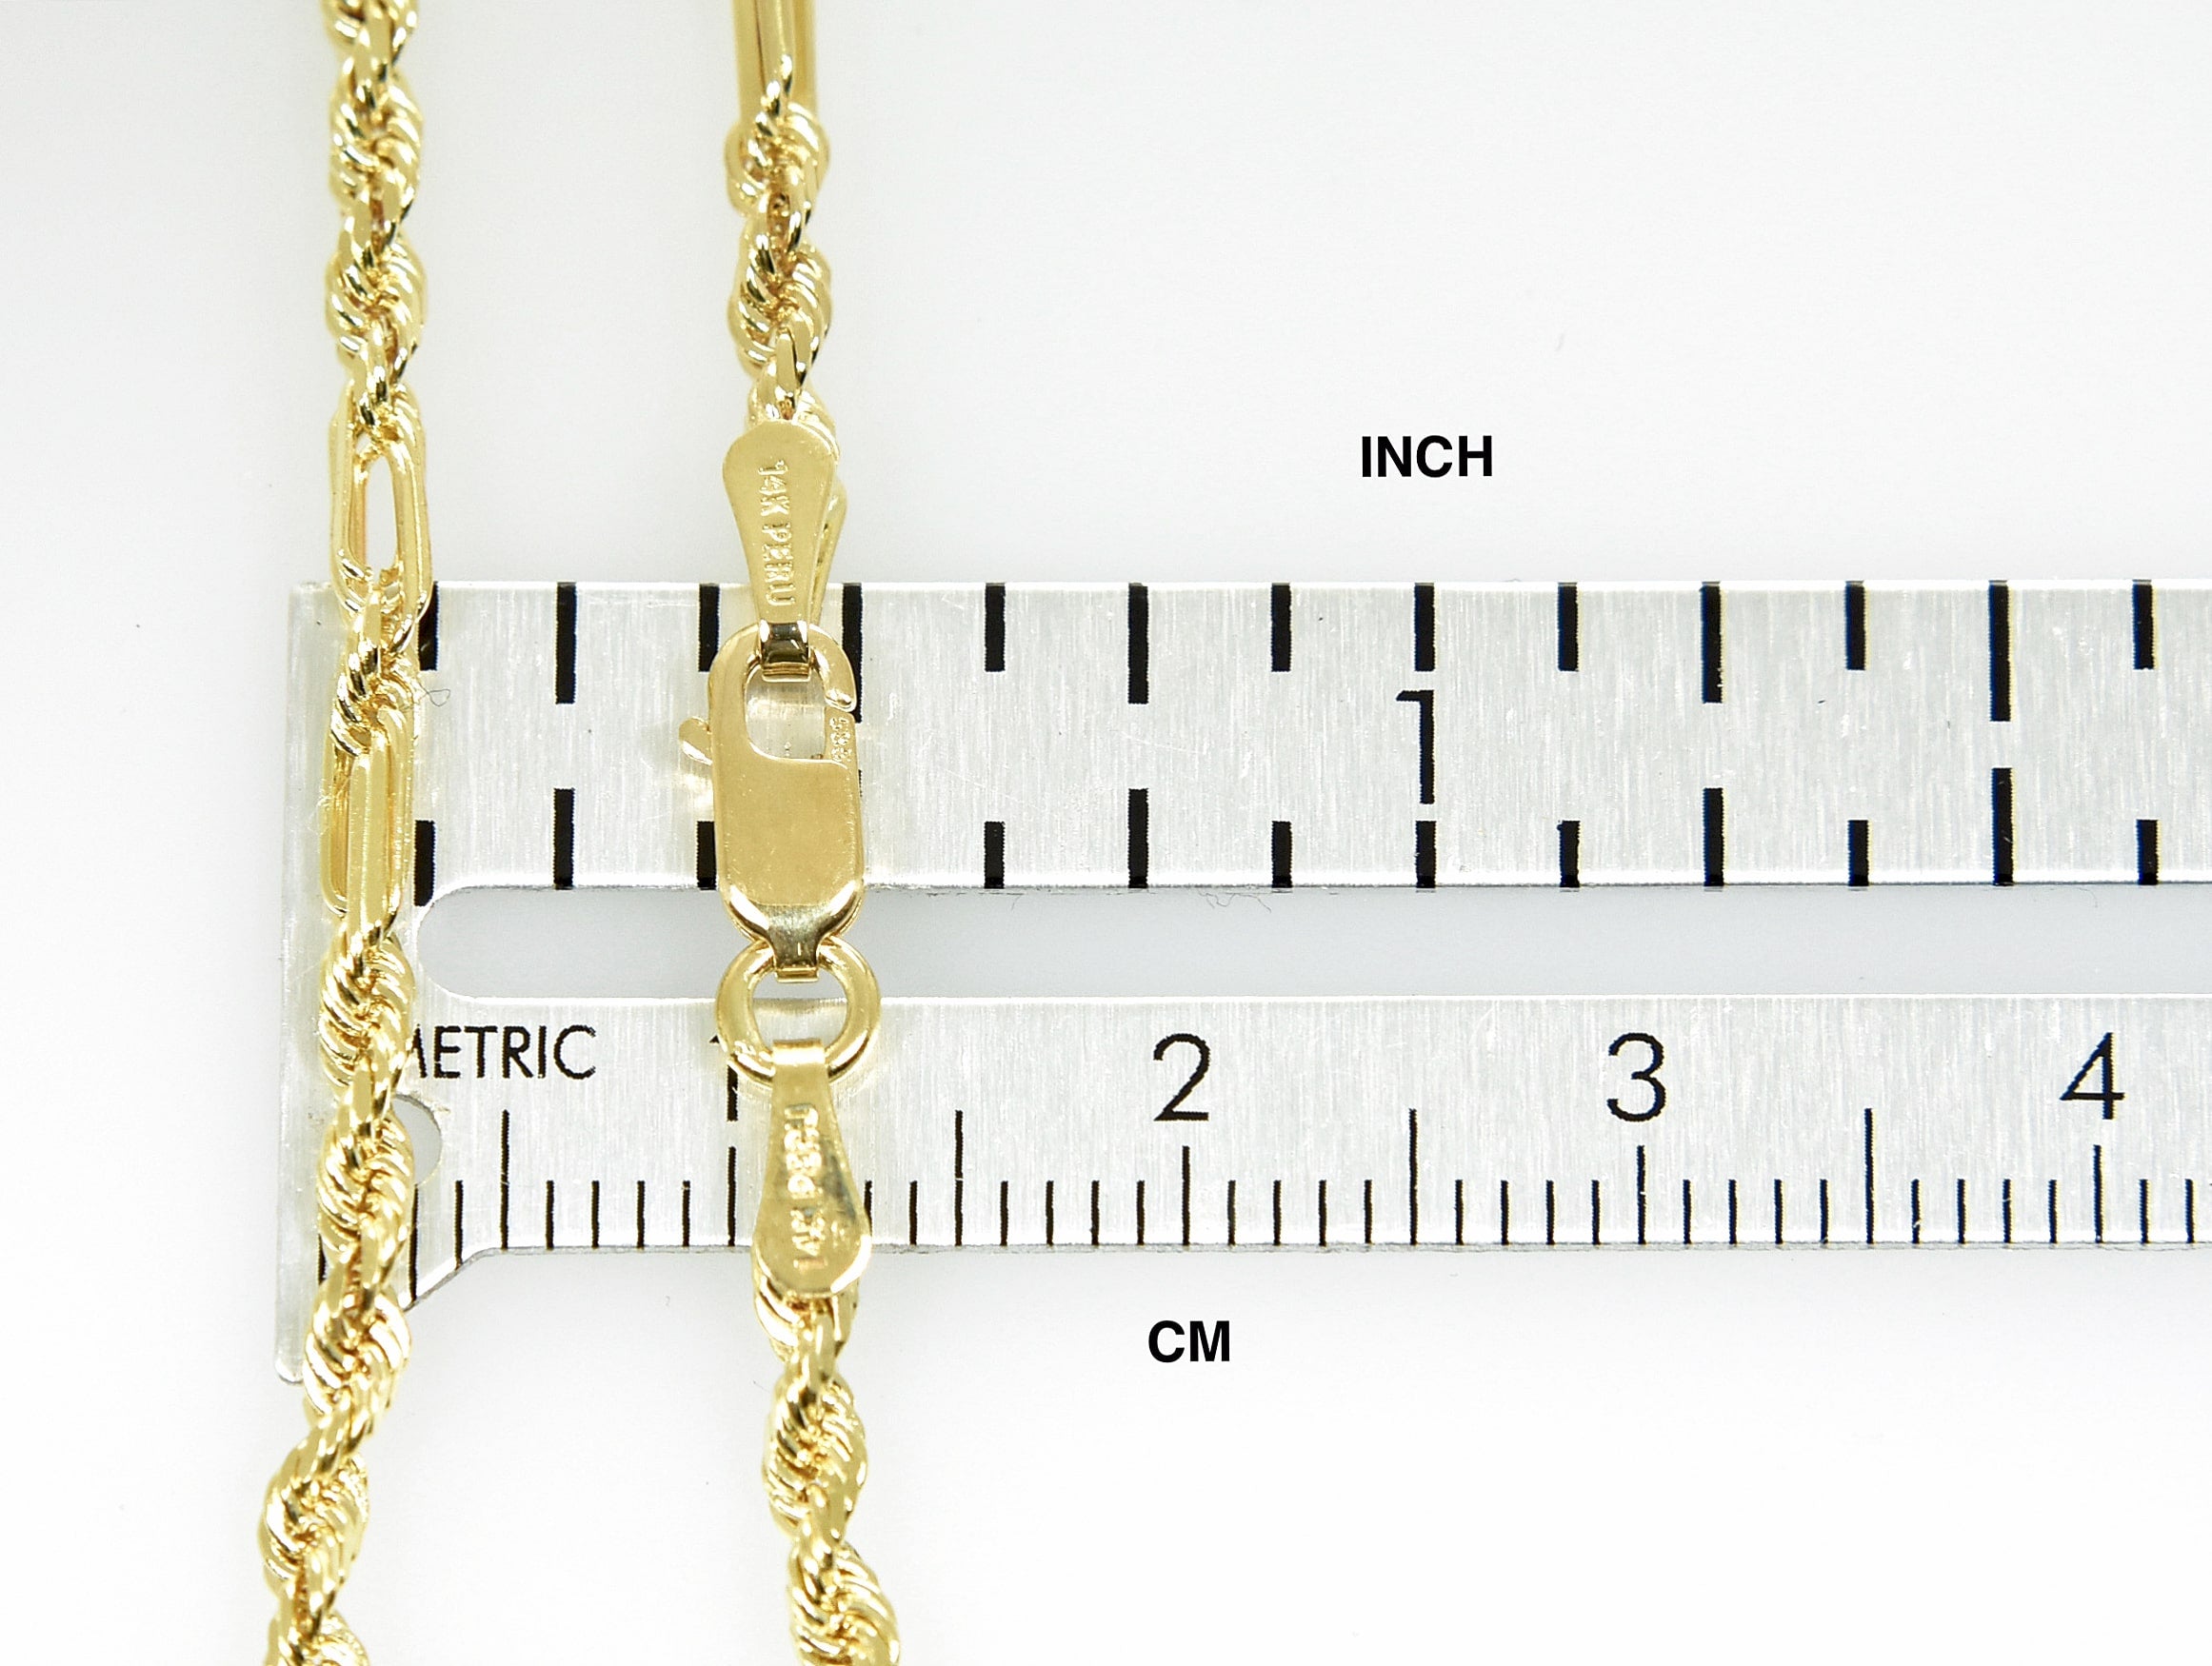 14K Yellow Gold 2.5mm Diamond Cut Milano Rope Bracelet Anklet Necklace Pendant Chain